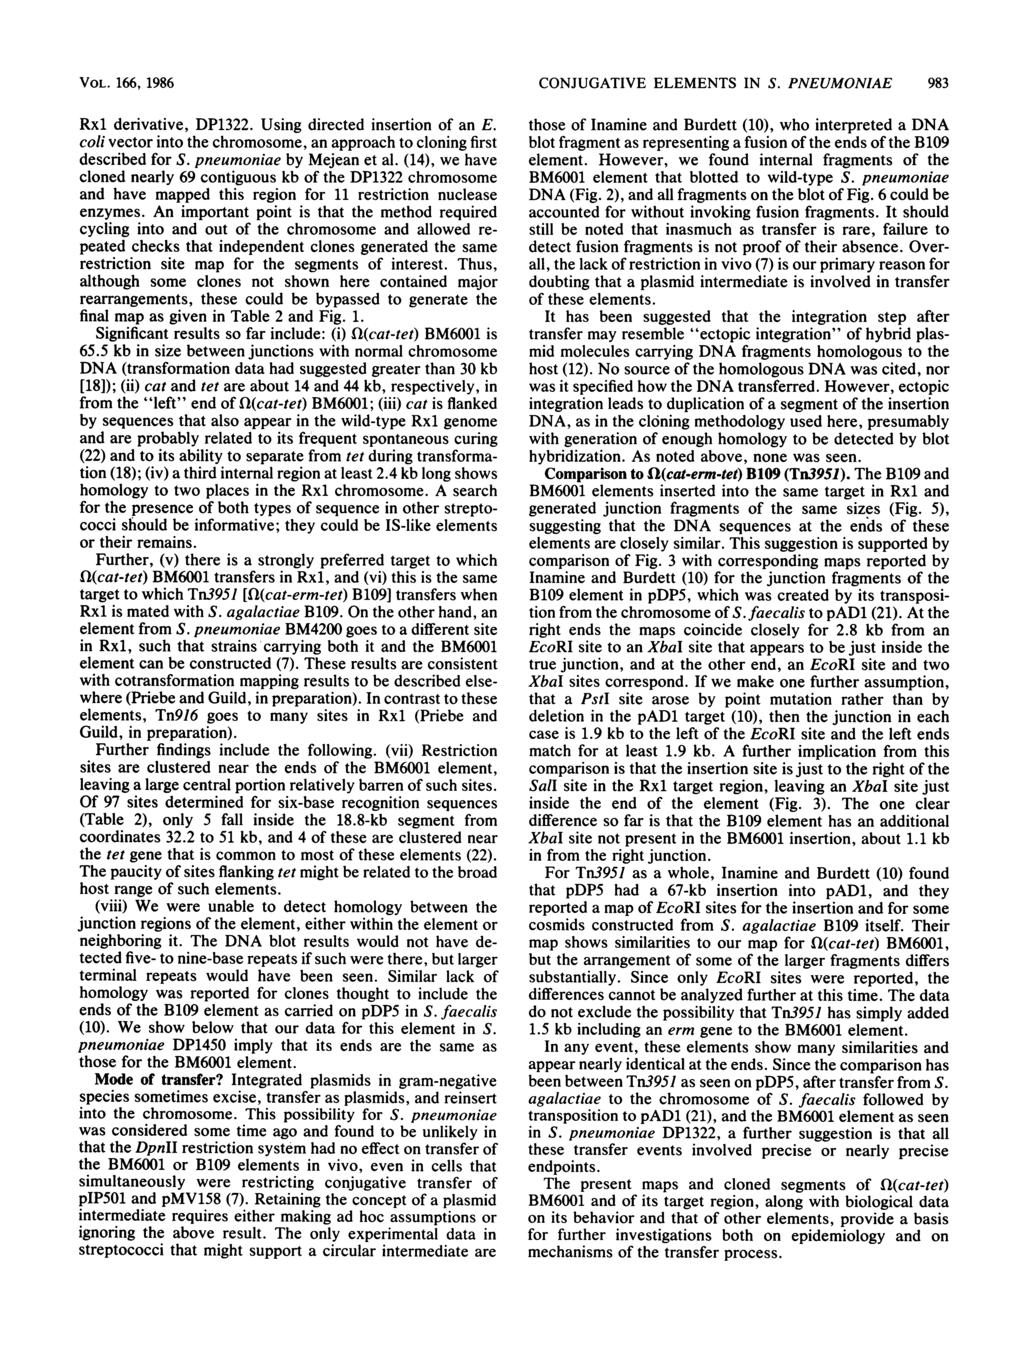 VOL. 166, 1986 Rxl derivative, DP1322. Using directed insertion of an E. coli vector into the chromosome, an approach to cloning first described for S. pneumoniae by Mejean et al.